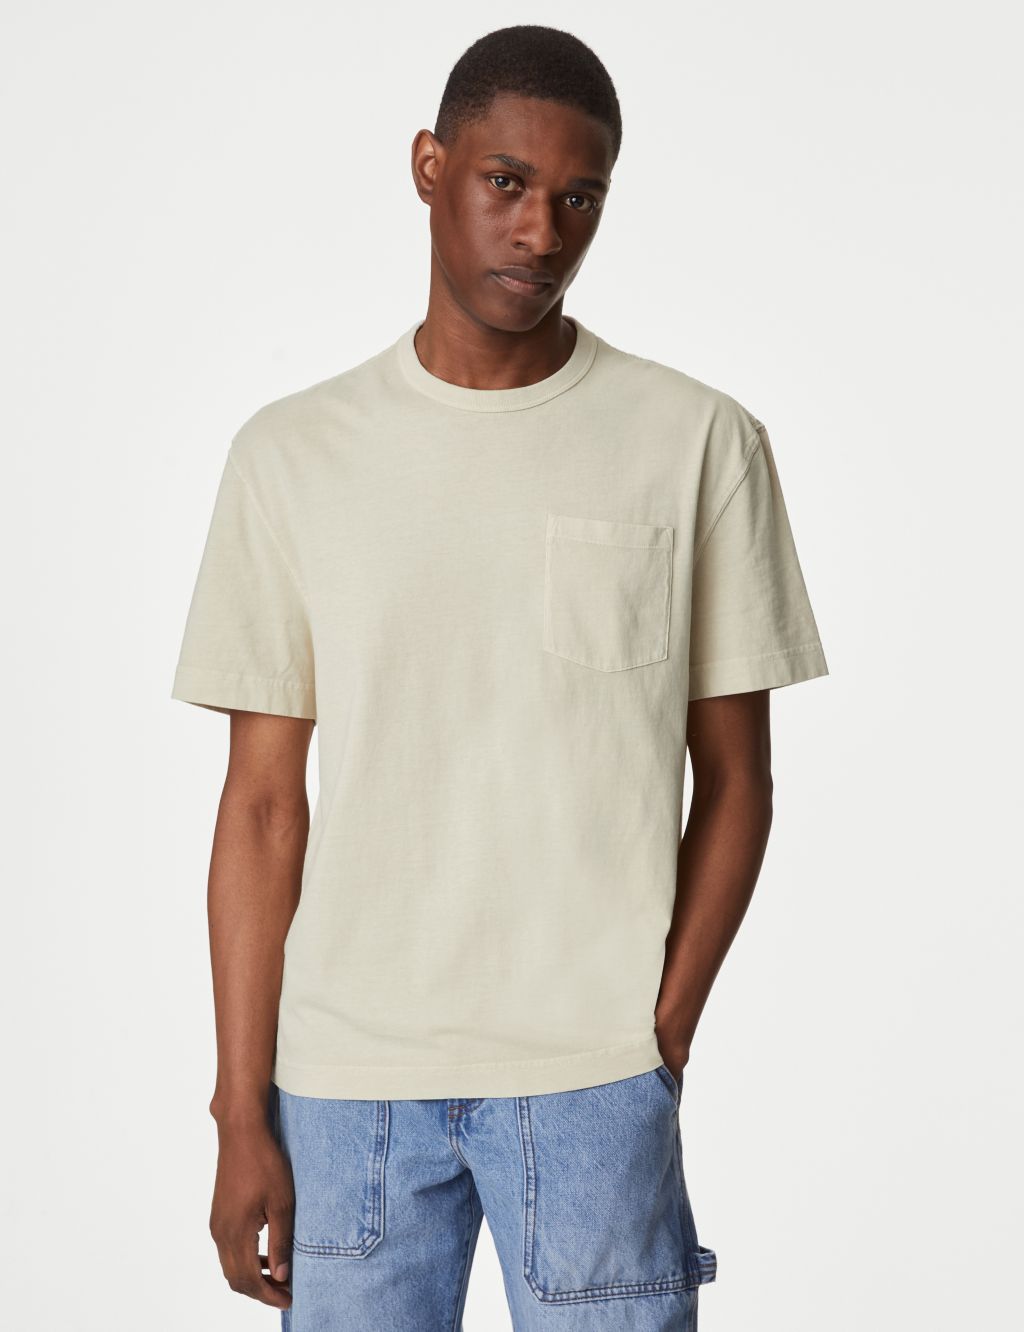 Men's Relaxed-Fit Tops